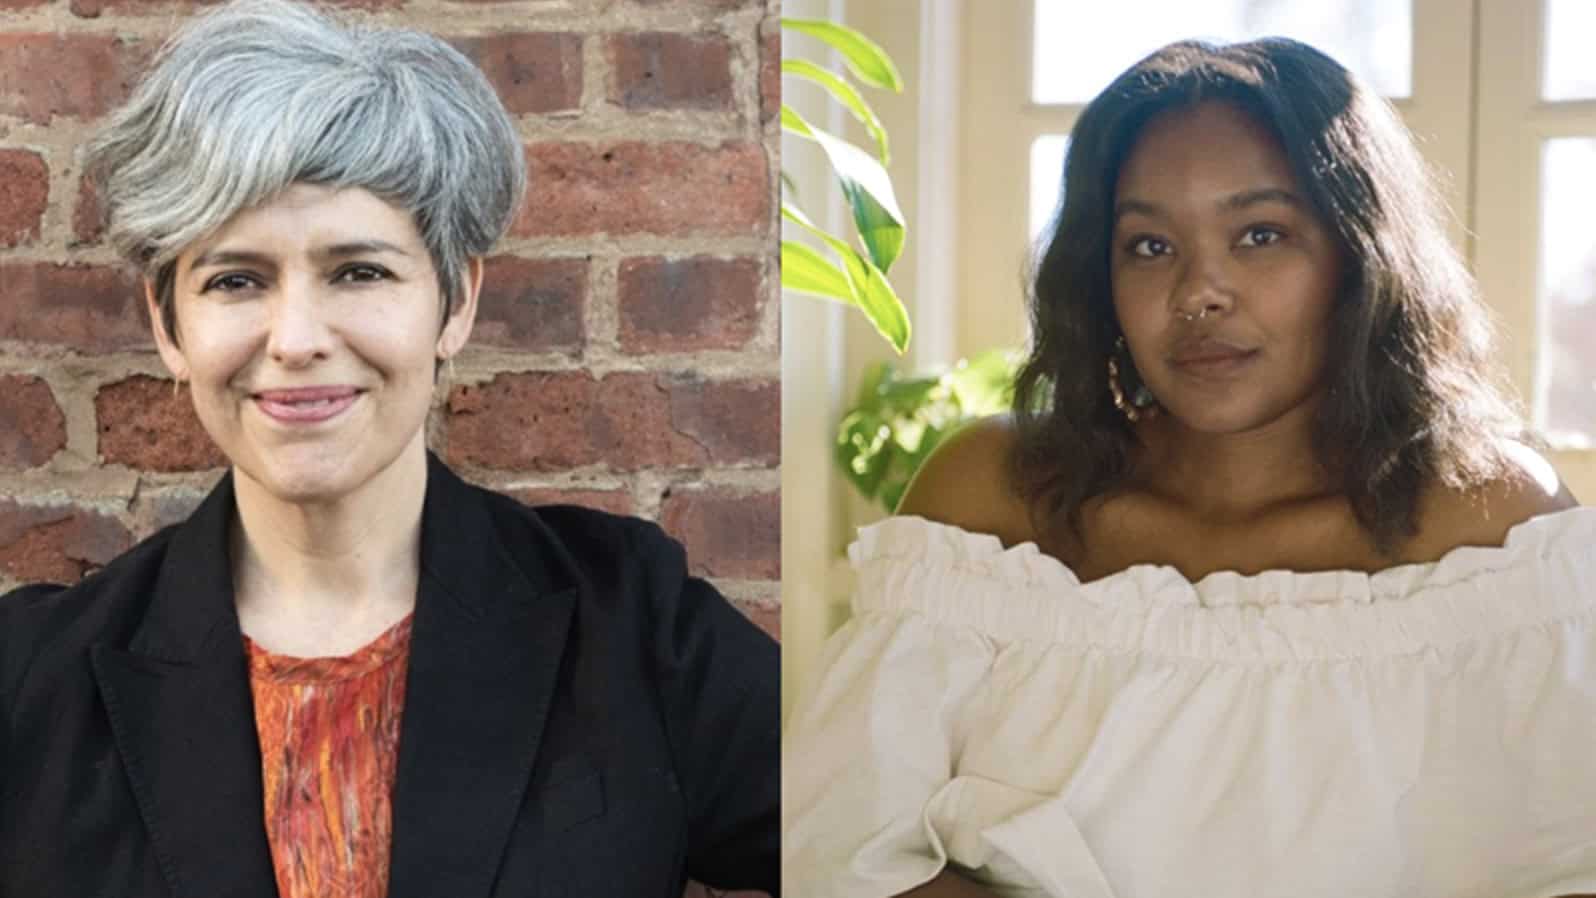 Poetry at Bennington welcomes awardwinning poets Mónica de la Torre and Courtney Faye Taylor for a public reading of their work. Press photo courtesy of Bennington College.